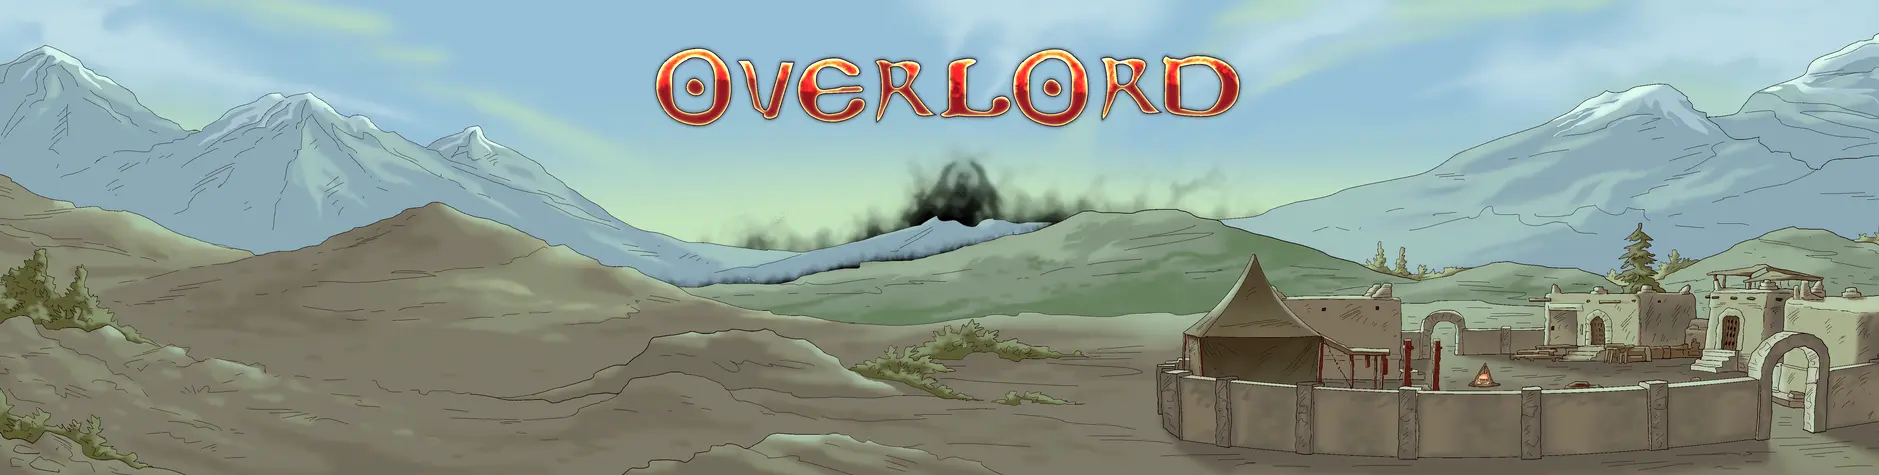 Overlord [v0.08a] main image